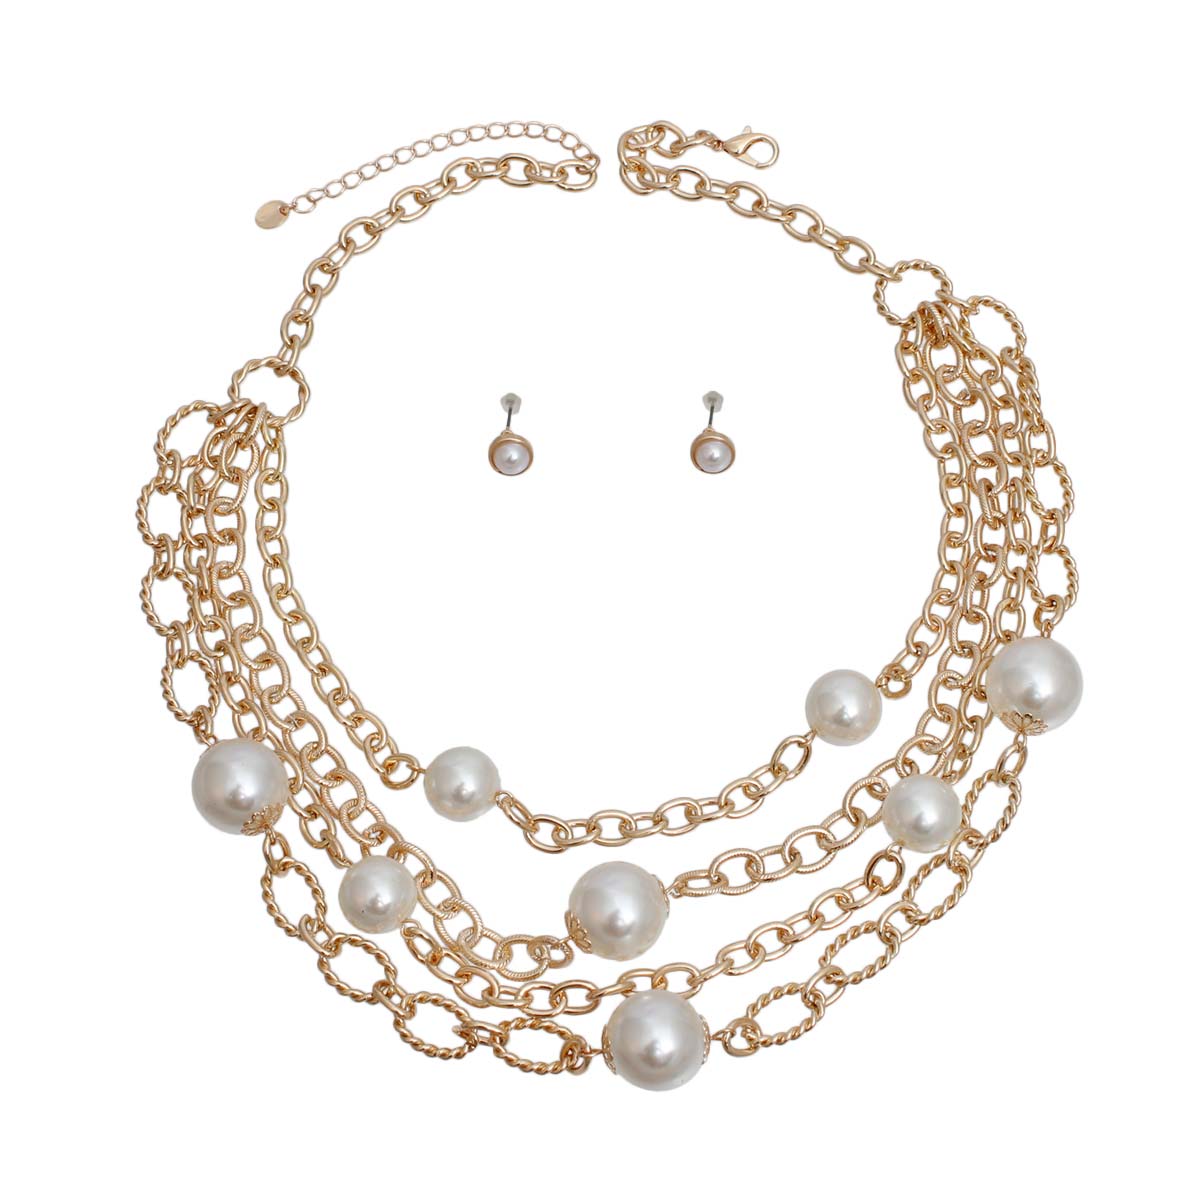 Cream Pearl 4 Layer Chain Link Necklace